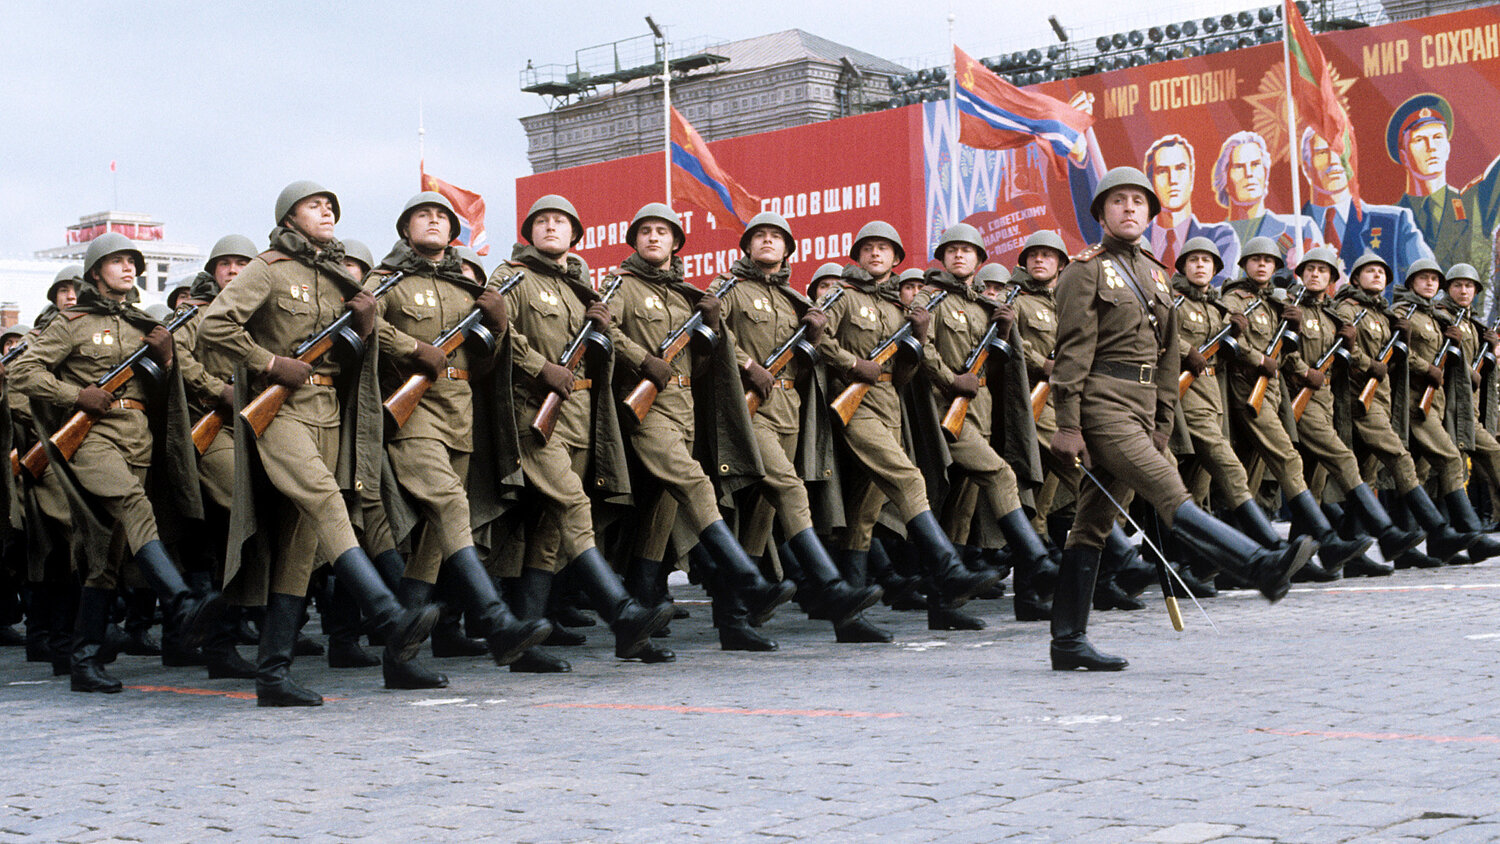 Prove You Have a Ton of Random Knowledge by Getting 11/15 on This Quiz Soviet+parade